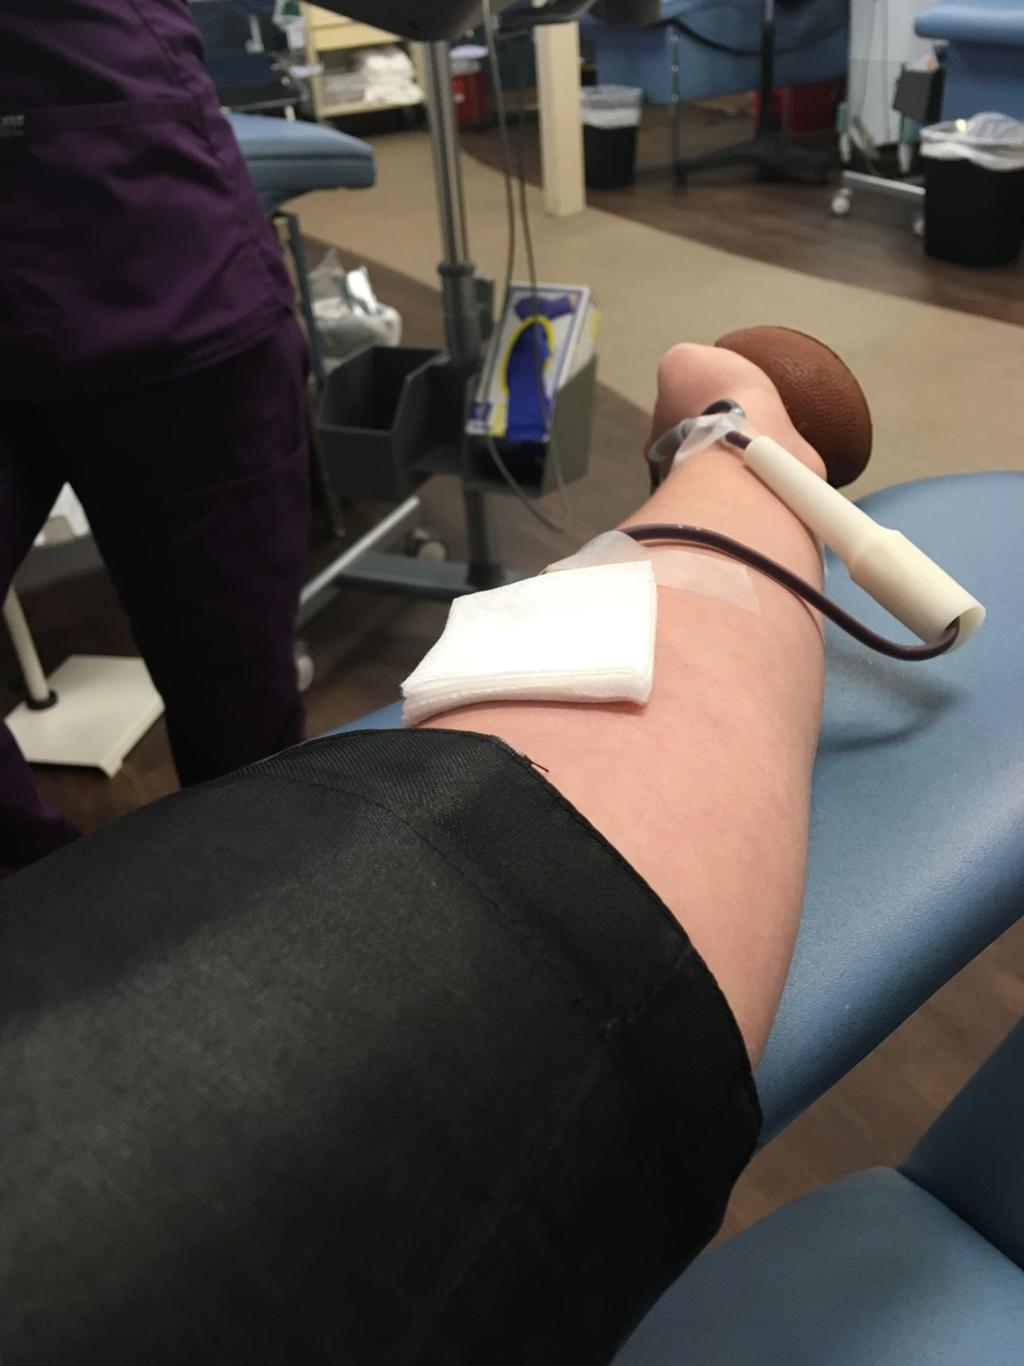 how much do you get for donating plasma in colorado springs